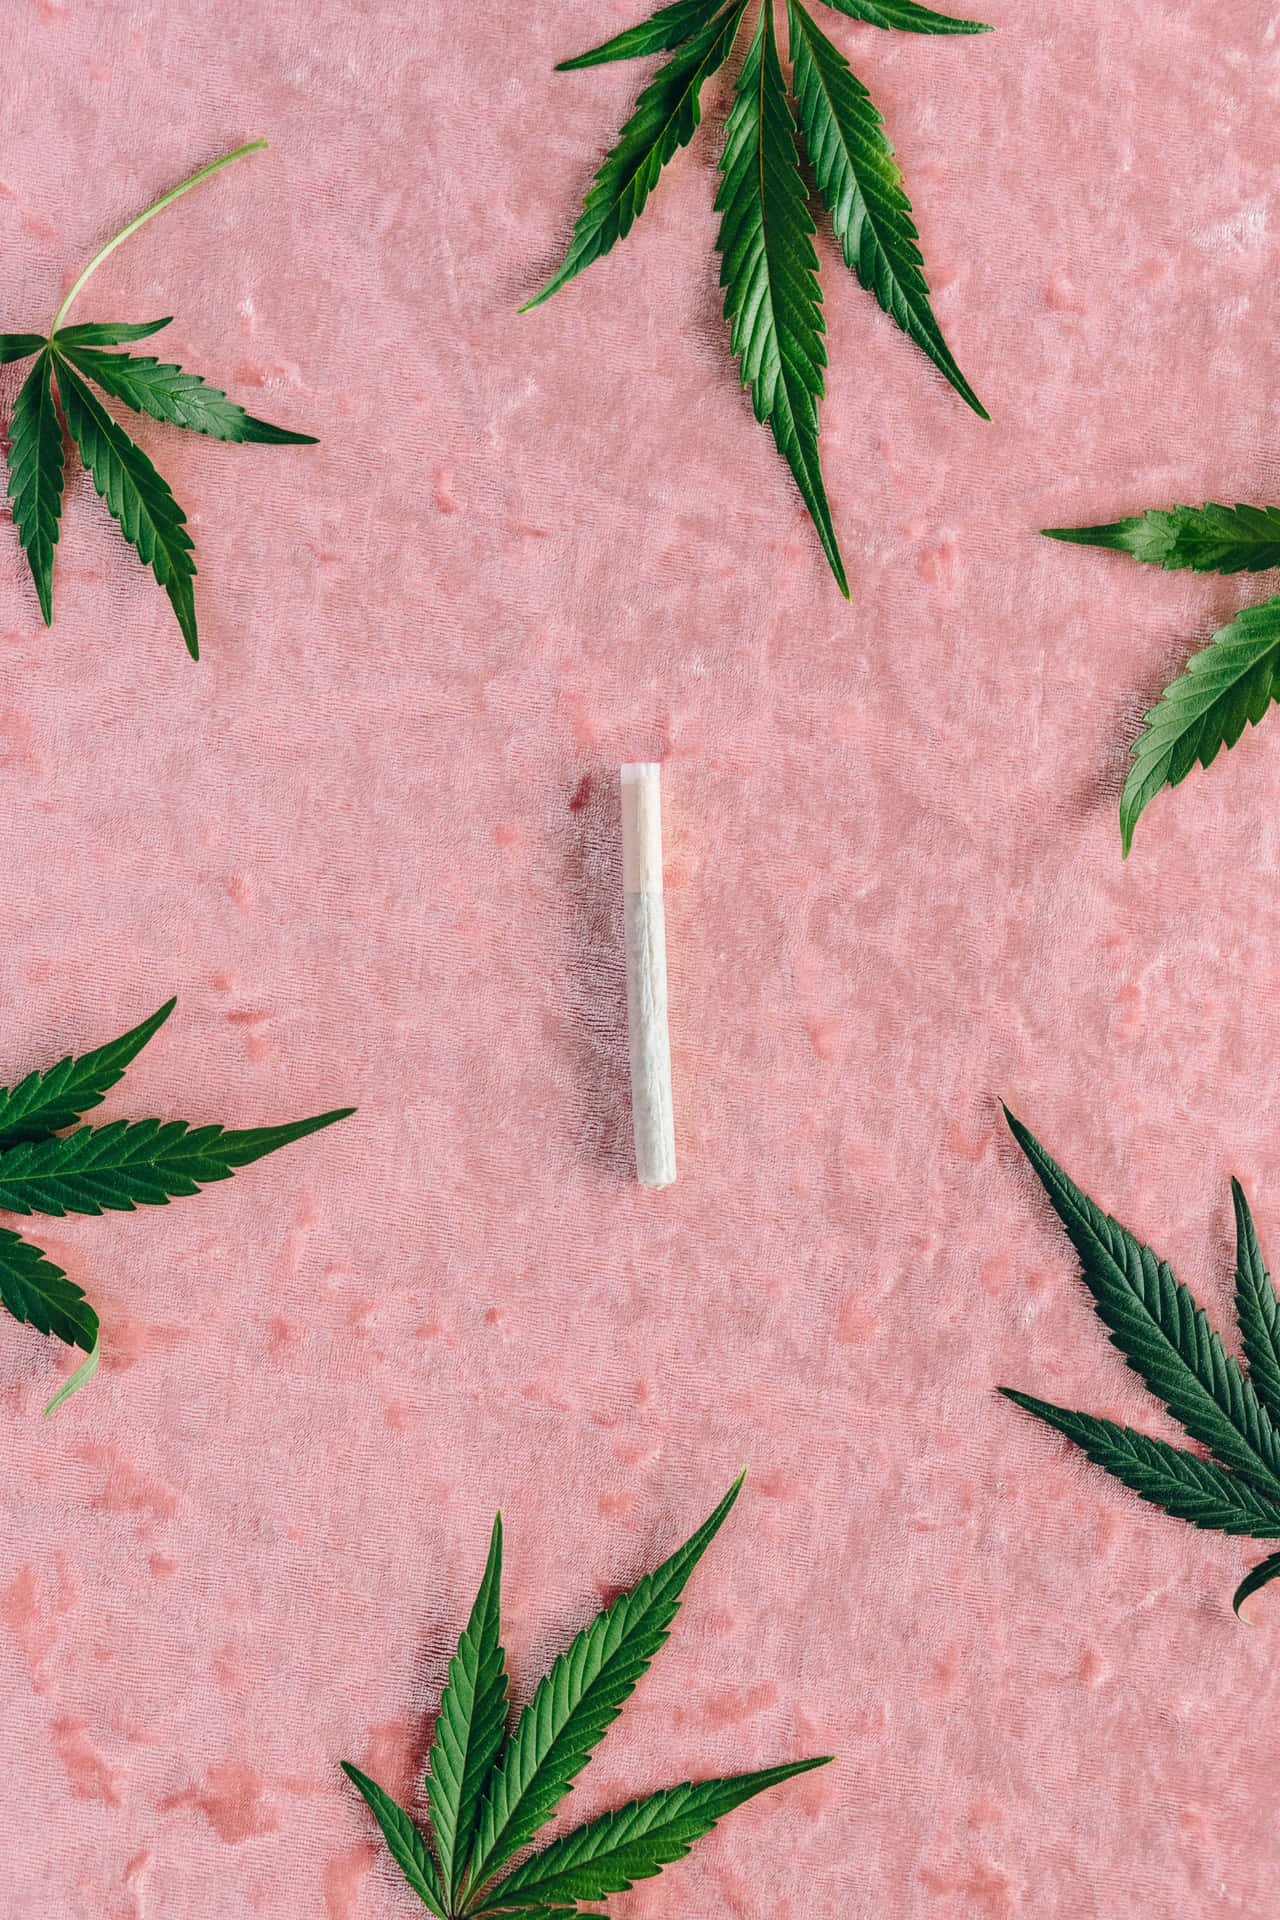 Enjoy the moment and relax with a smooth hit from this hand-rolled weed blunt Wallpaper